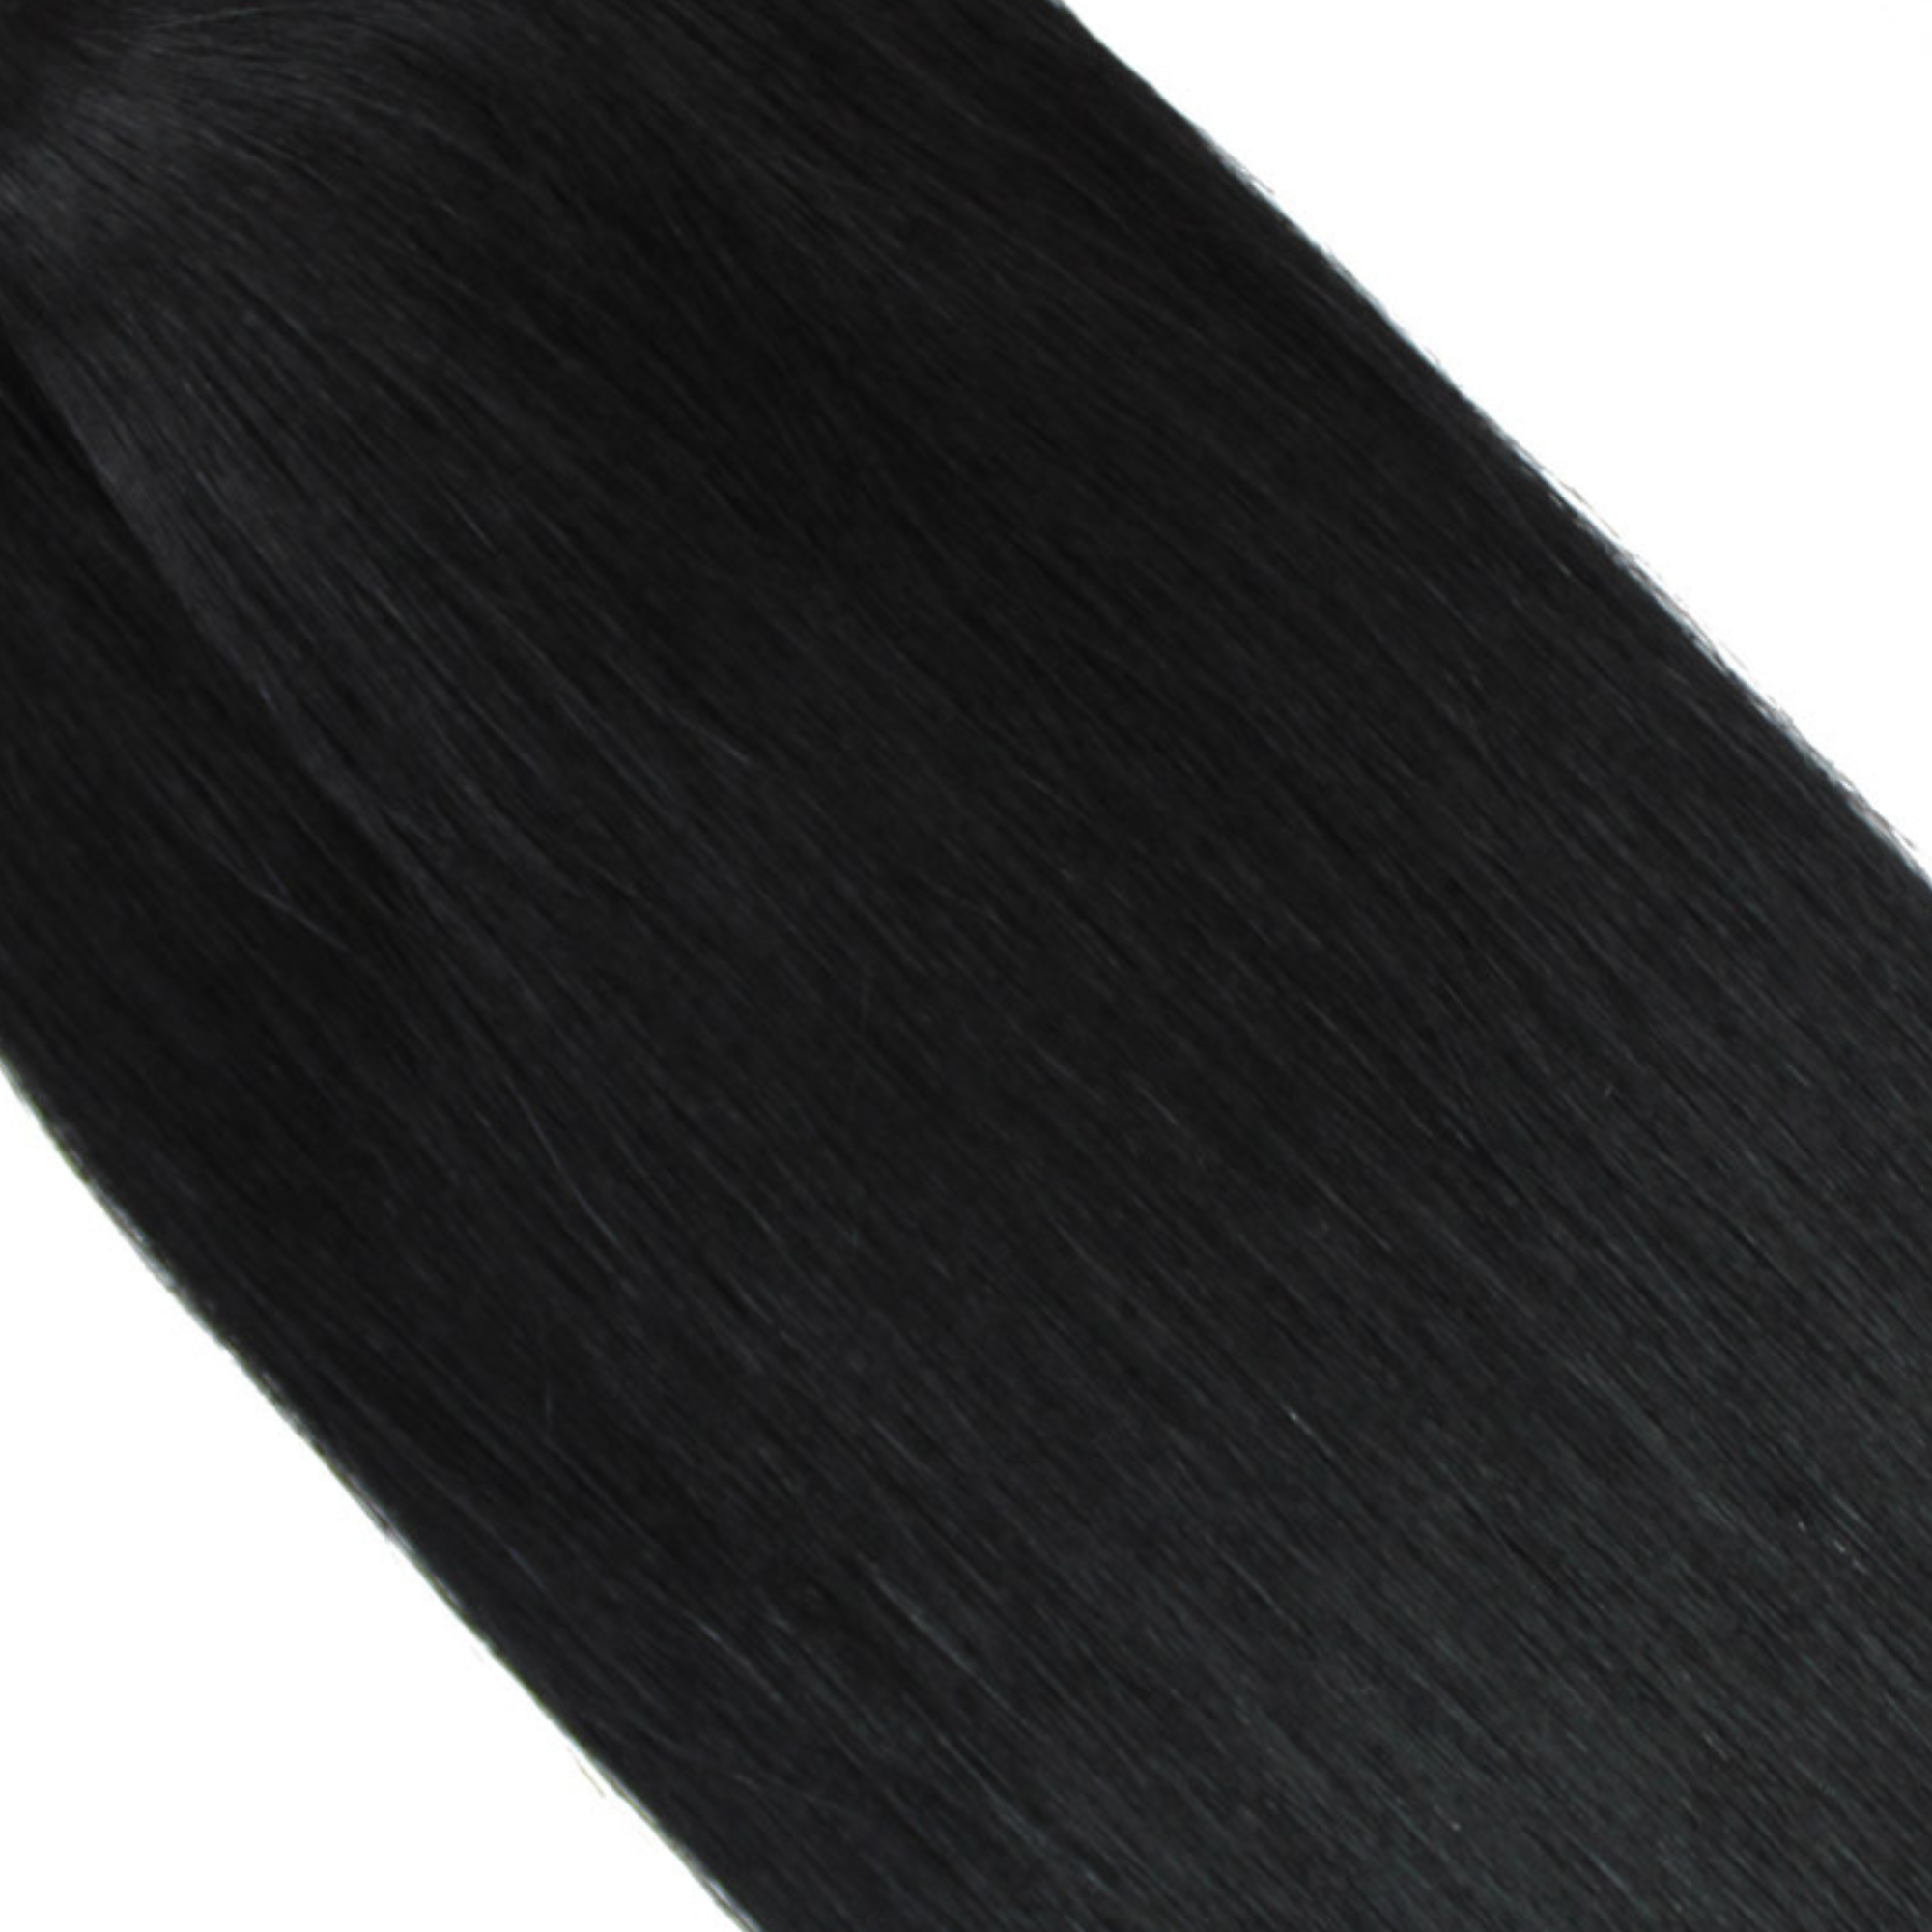 "hair rehab london 18" tape hair extensions shade swatch titled jet black"